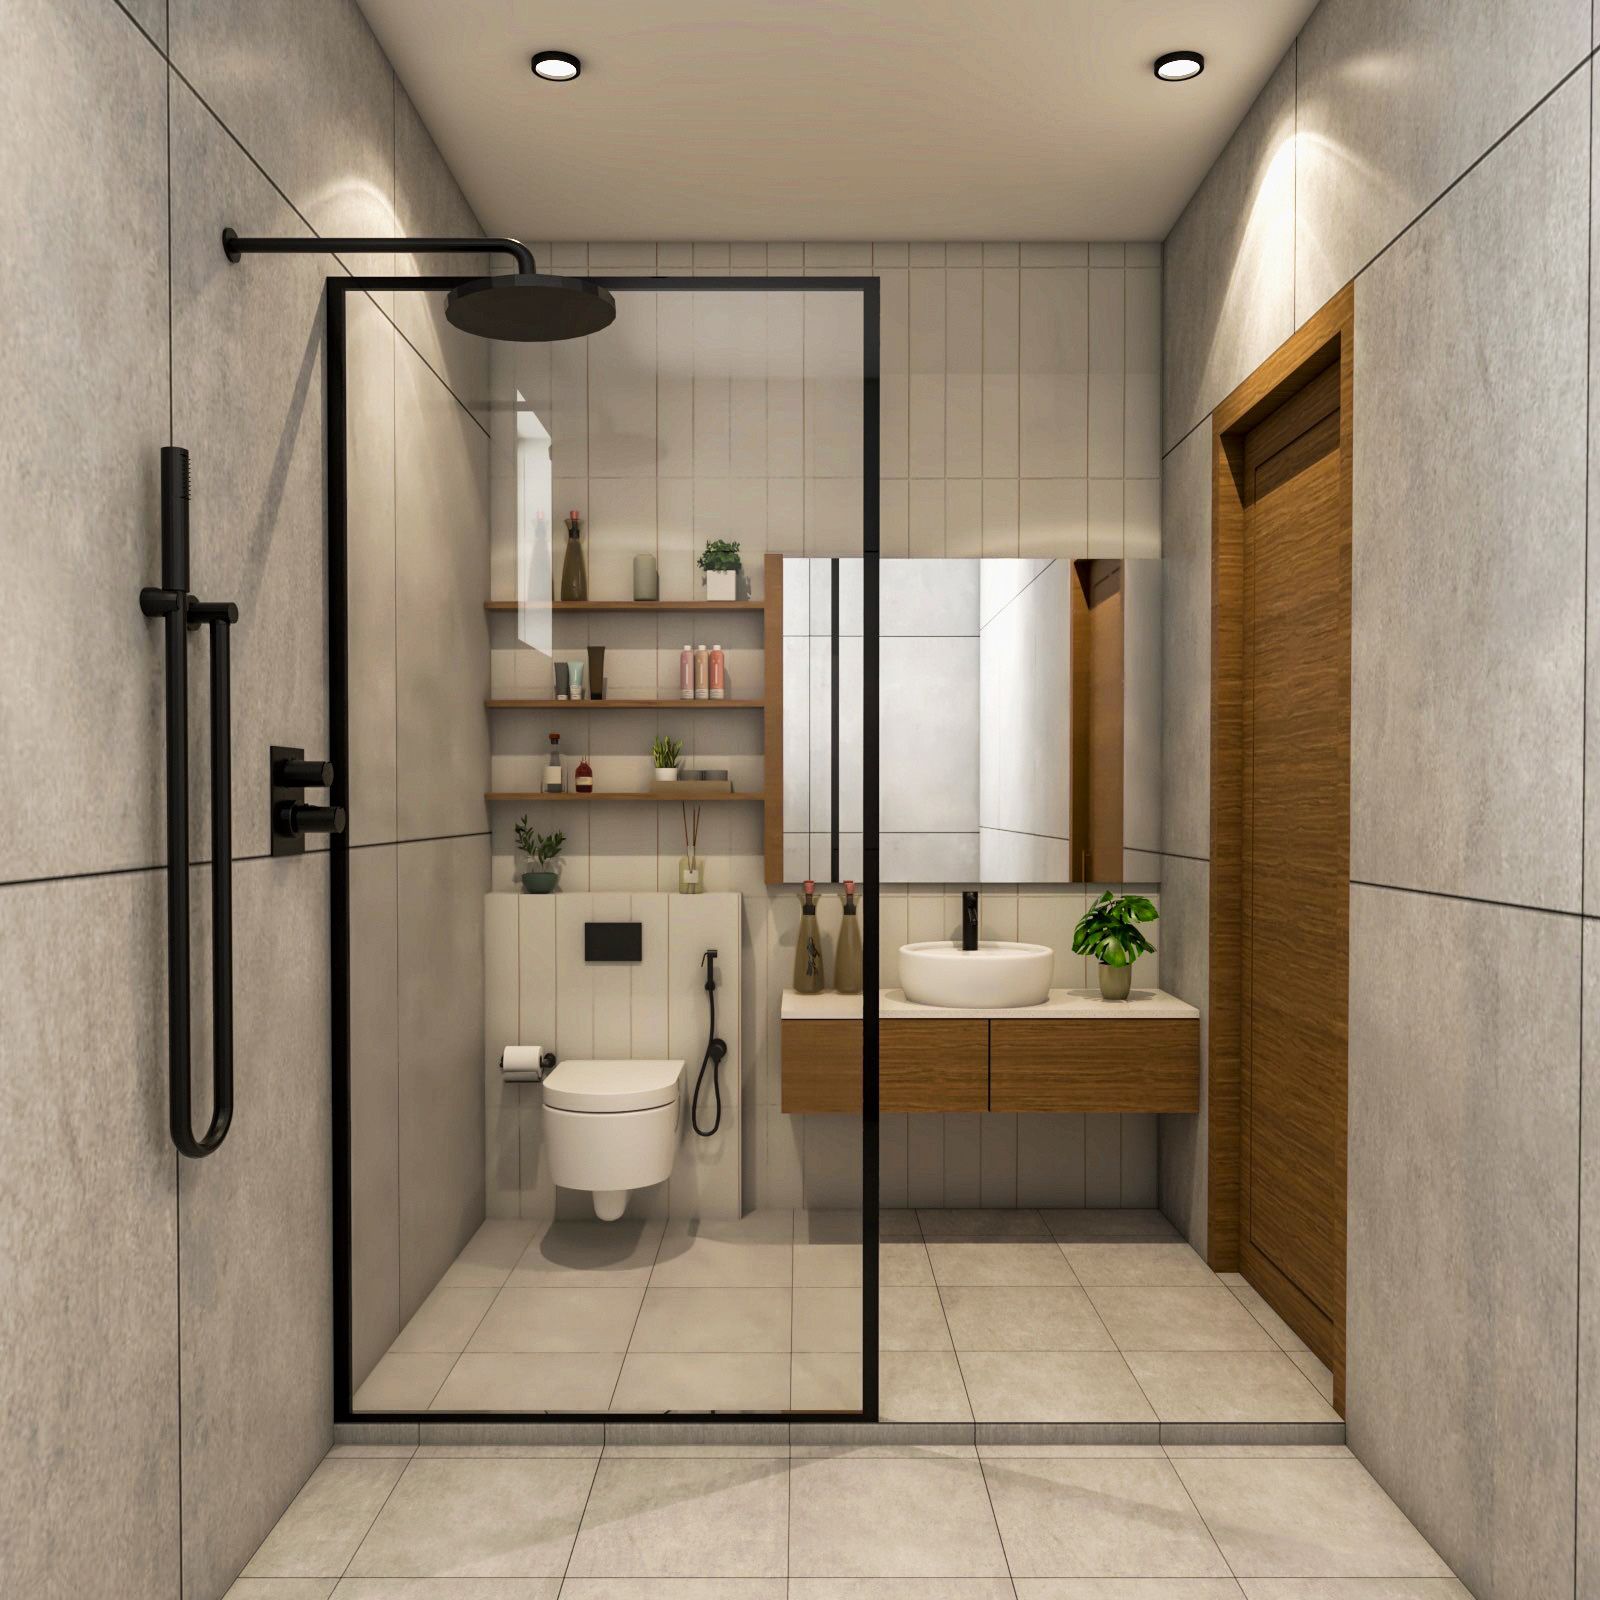 Contemporary Grey And Off-White Bathroom Design With Wooden Bathroom Cabinet